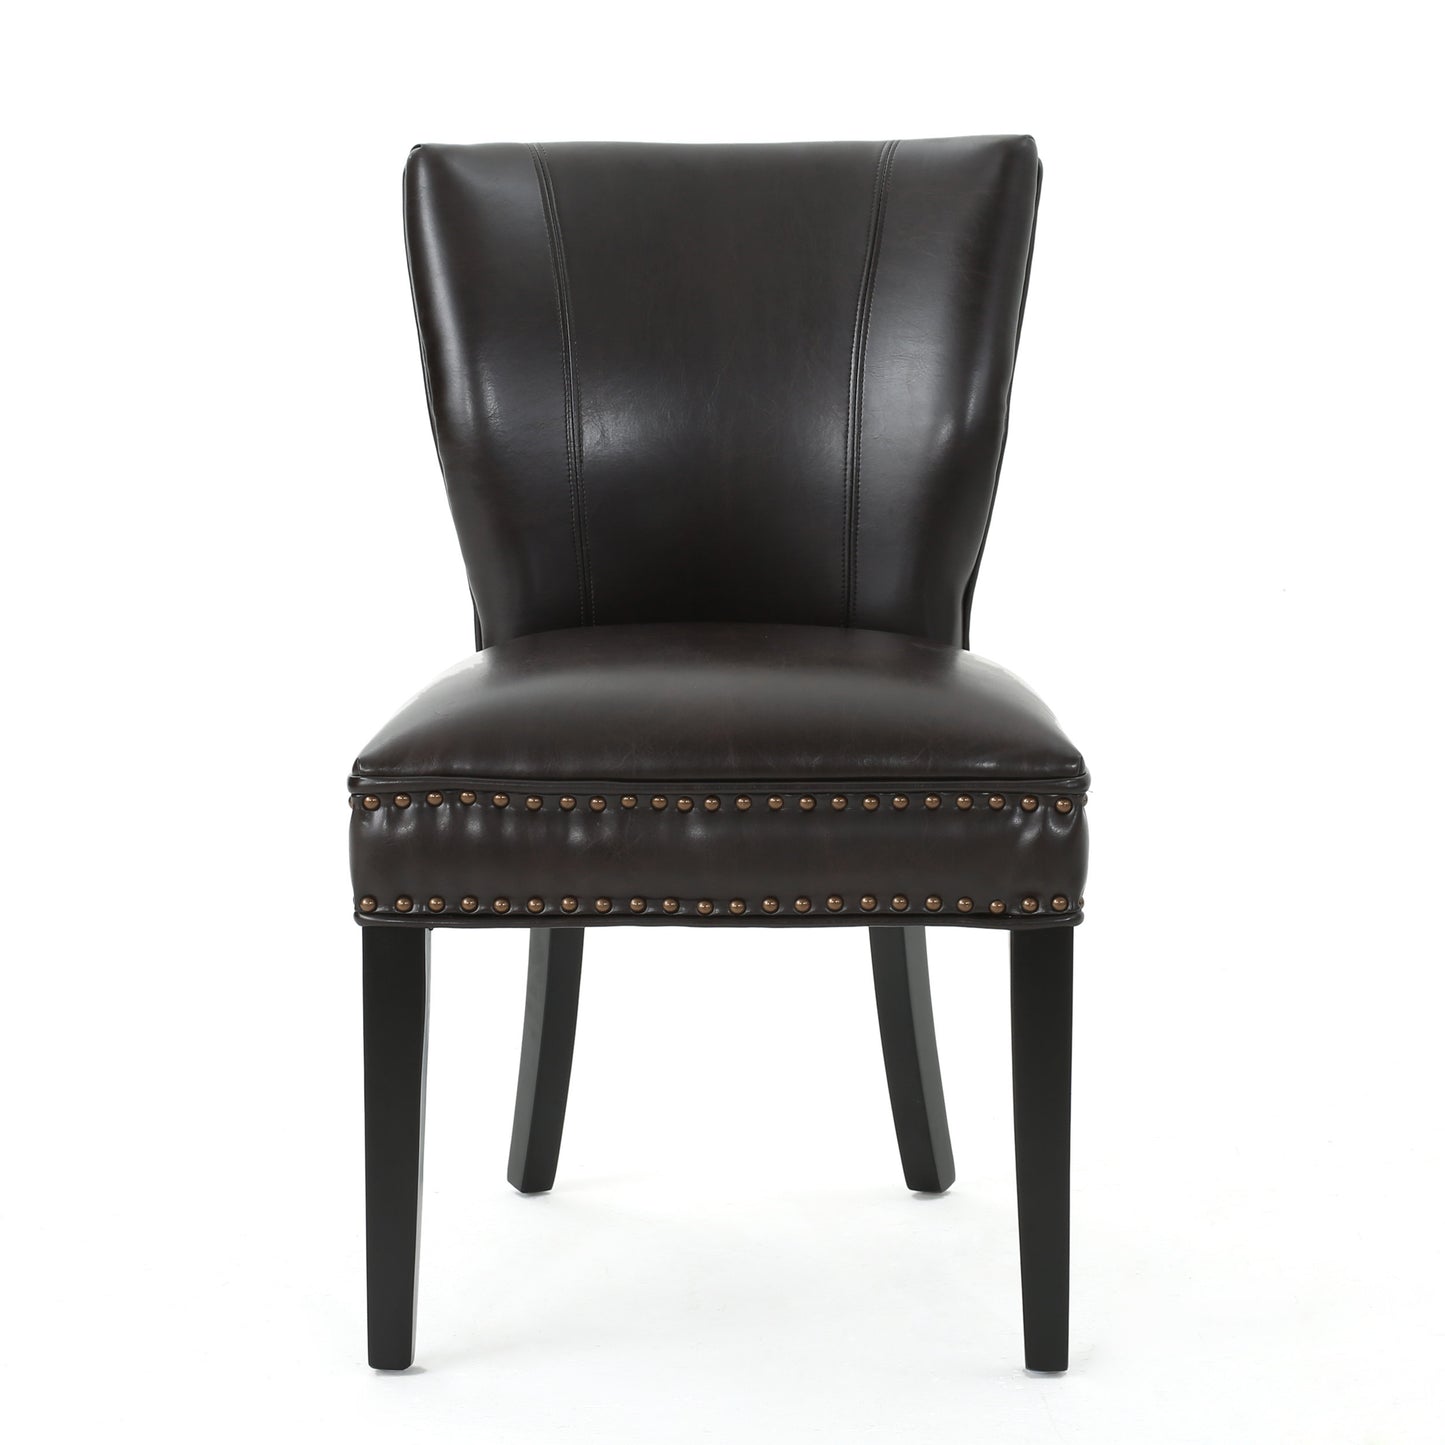 George Brown Leather Dining Chair